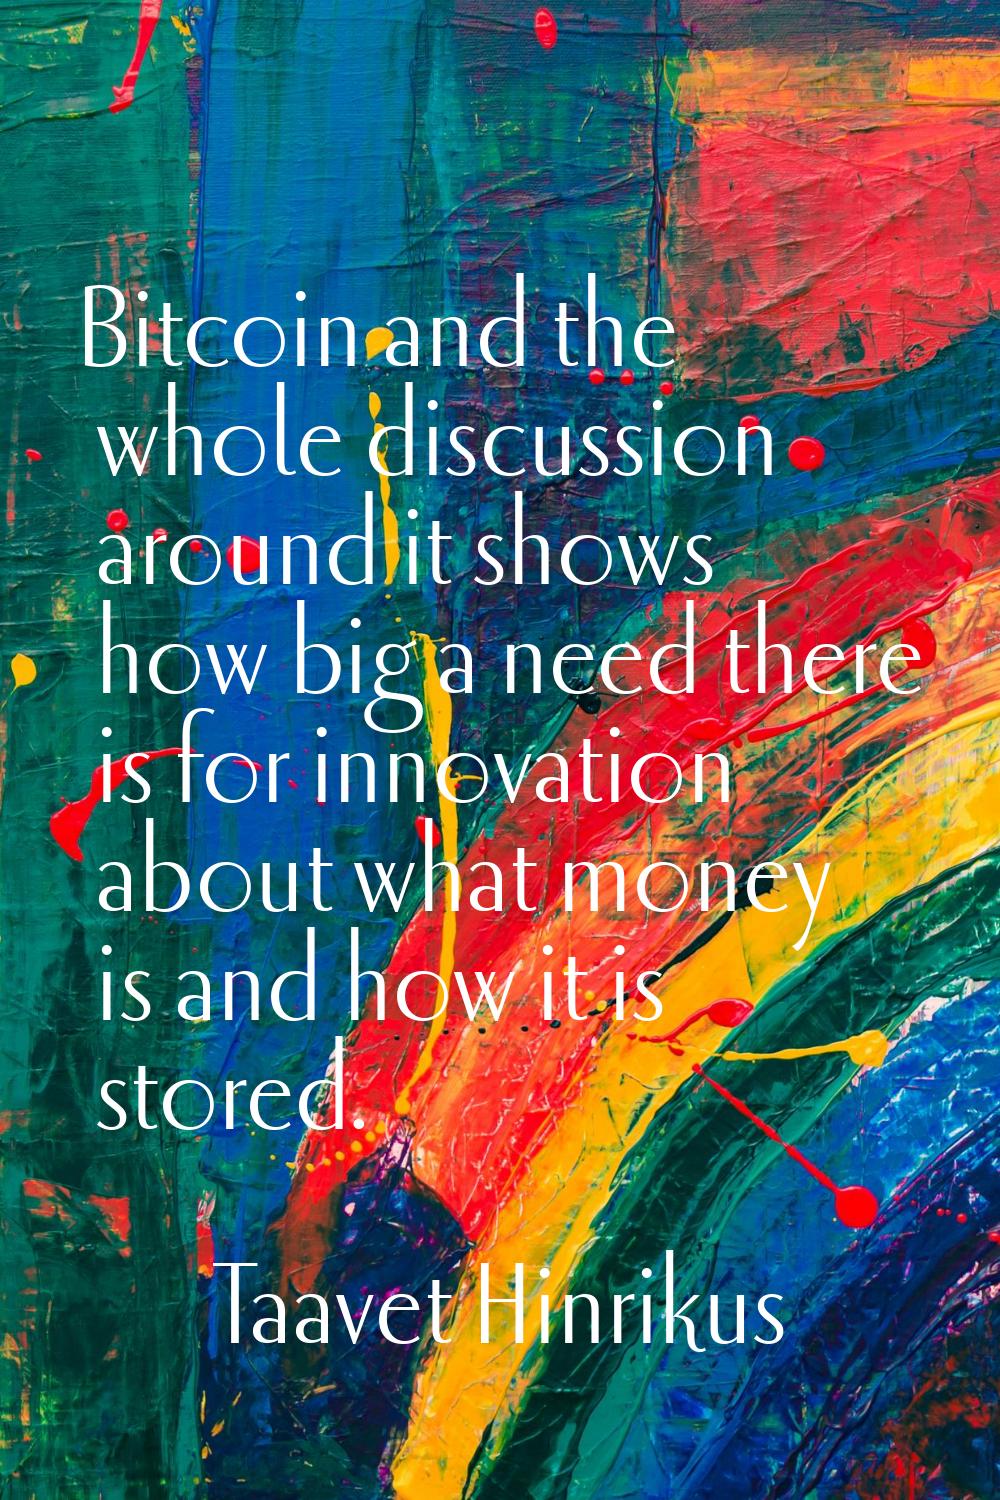 Bitcoin and the whole discussion around it shows how big a need there is for innovation about what 